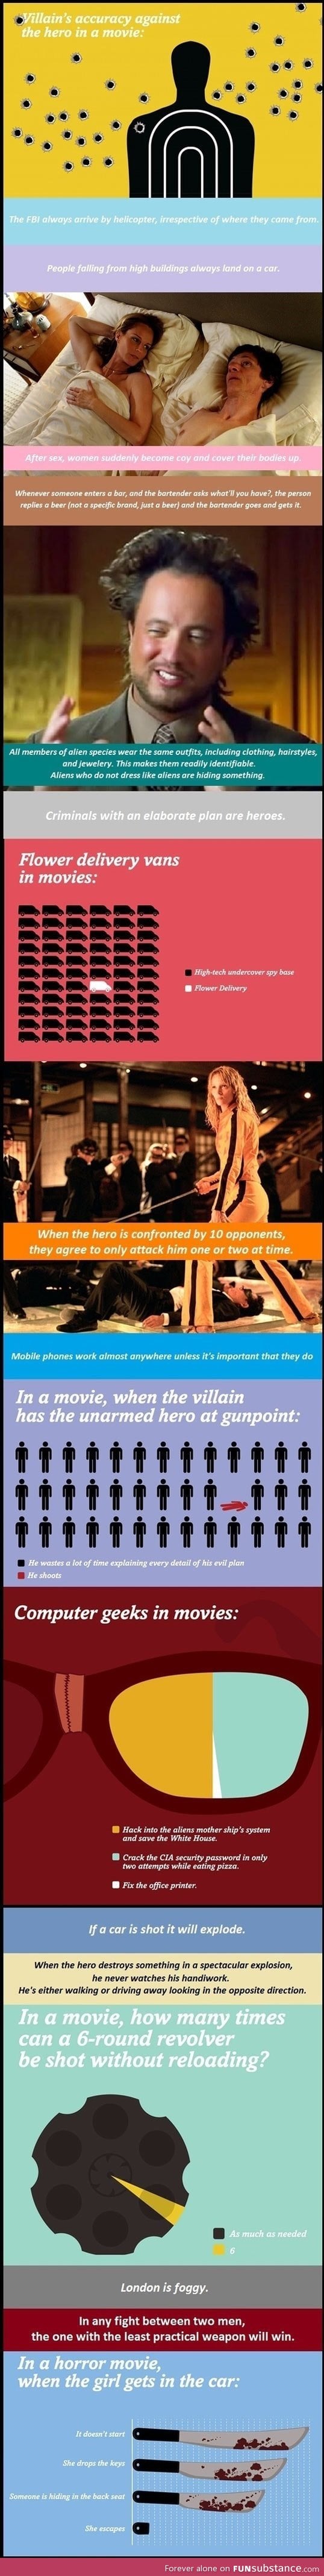 Stuff That Only Happens In Movies